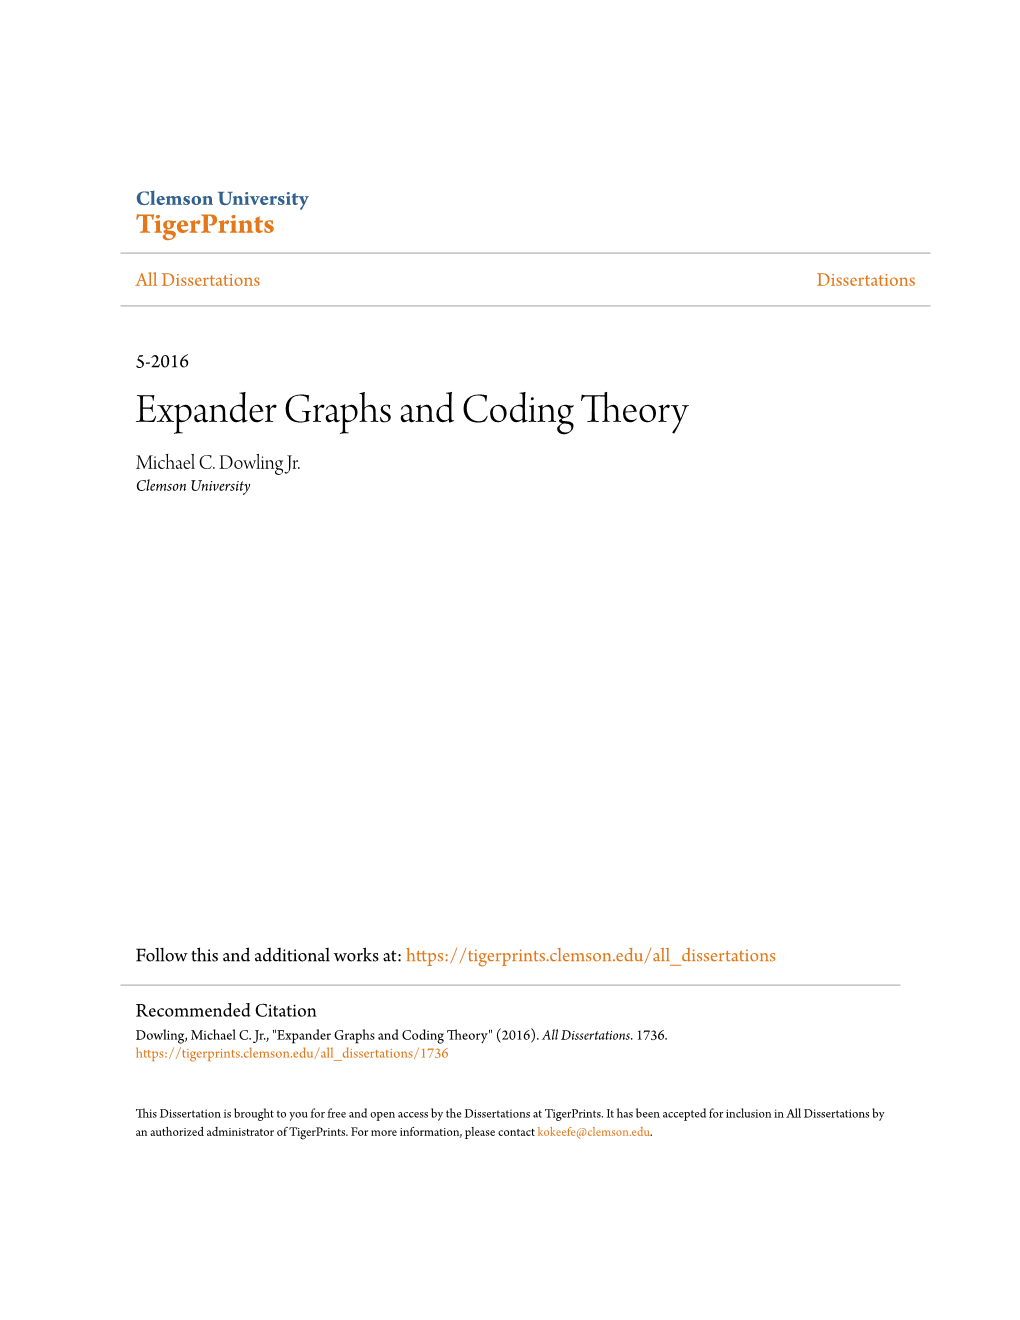 Expander Graphs and Coding Theory Michael C